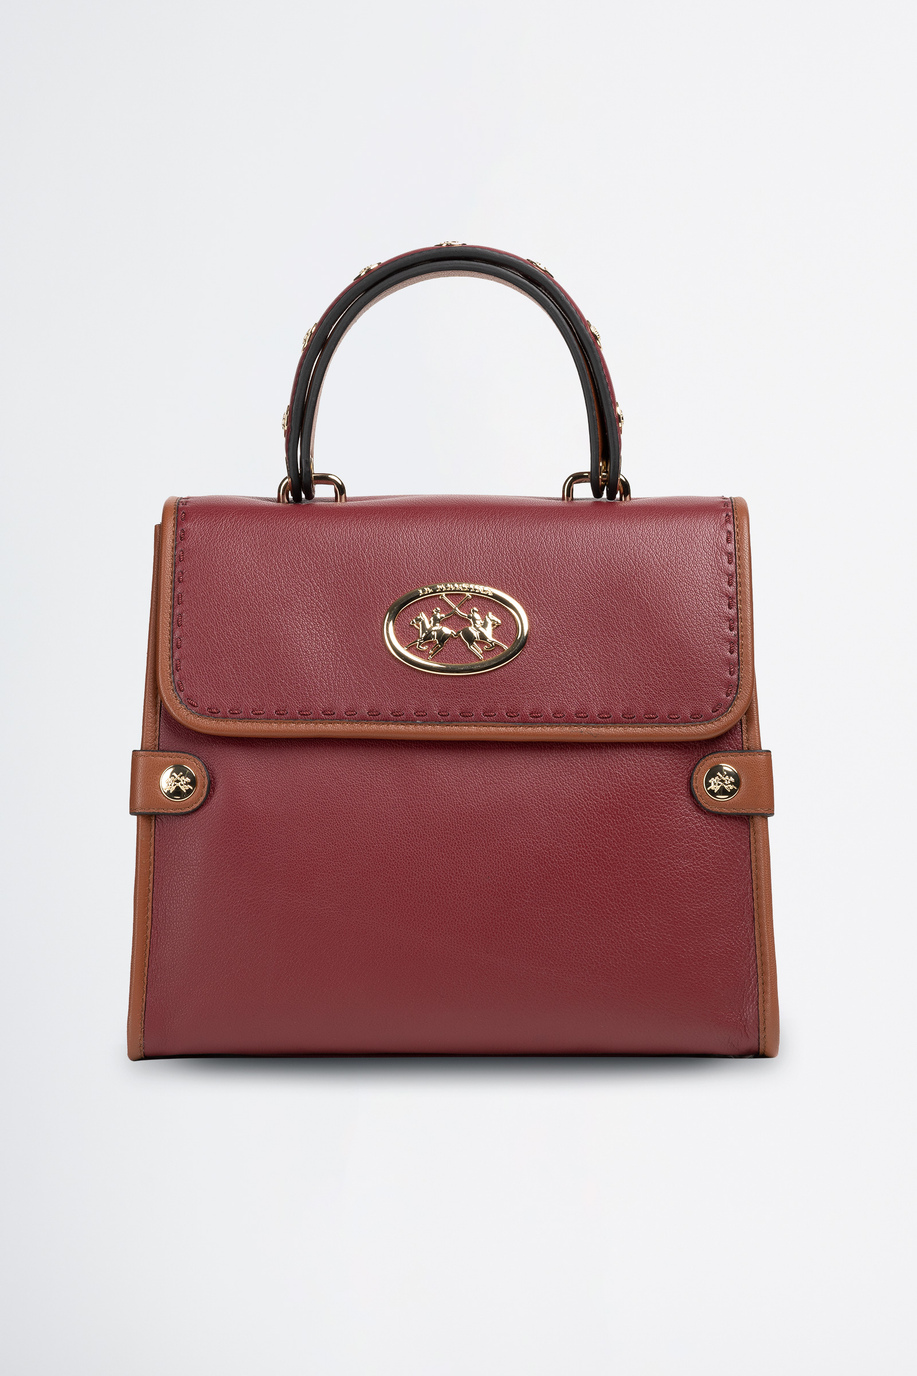 One handle bag in calf leather - Bags | La Martina - Official Online Shop